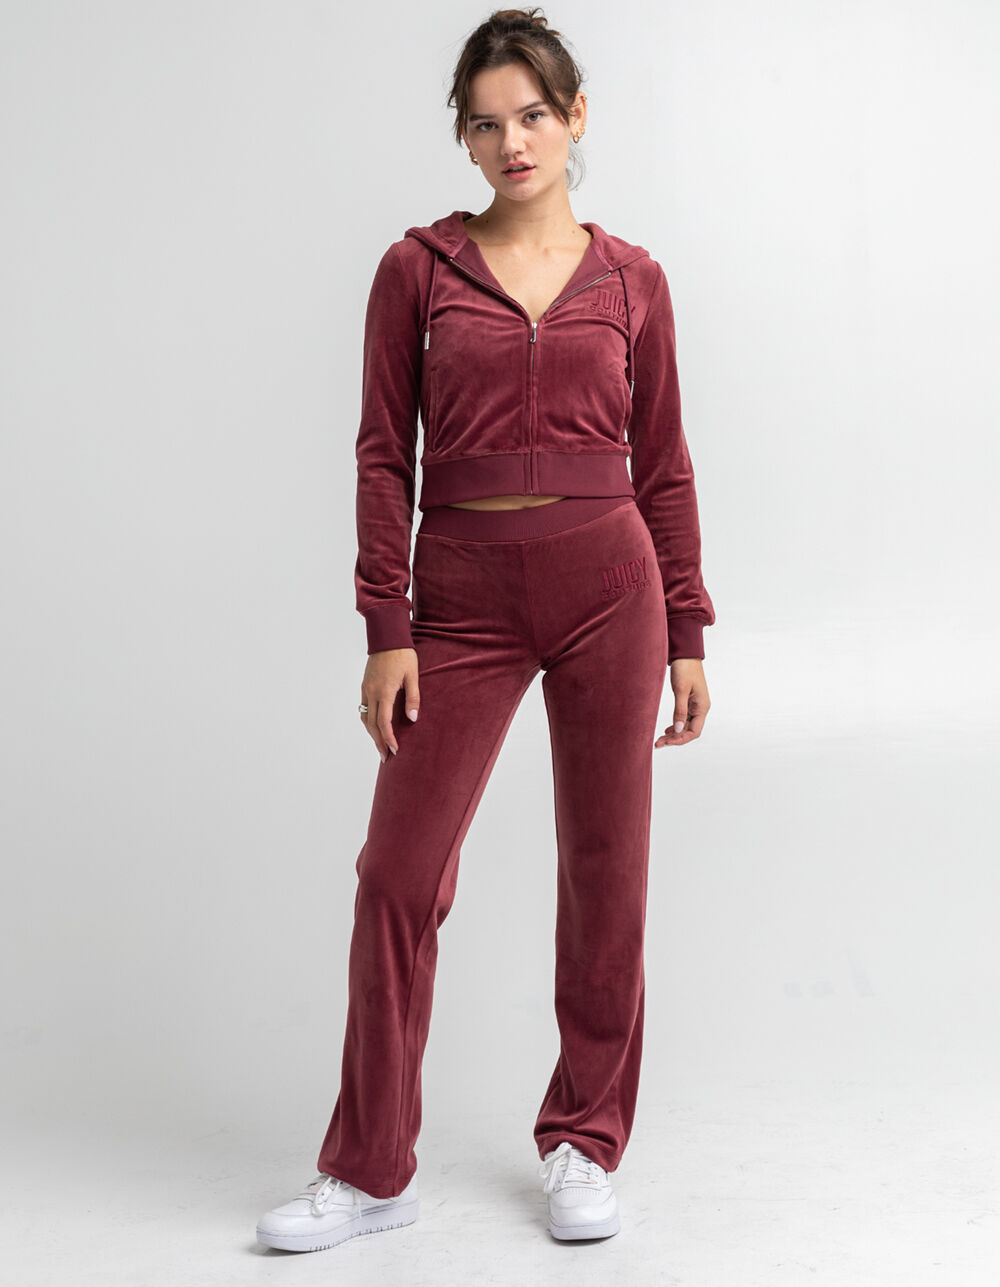 JUICY COUTURE Classic Womens Velour Hoodie - WINE | Tillys